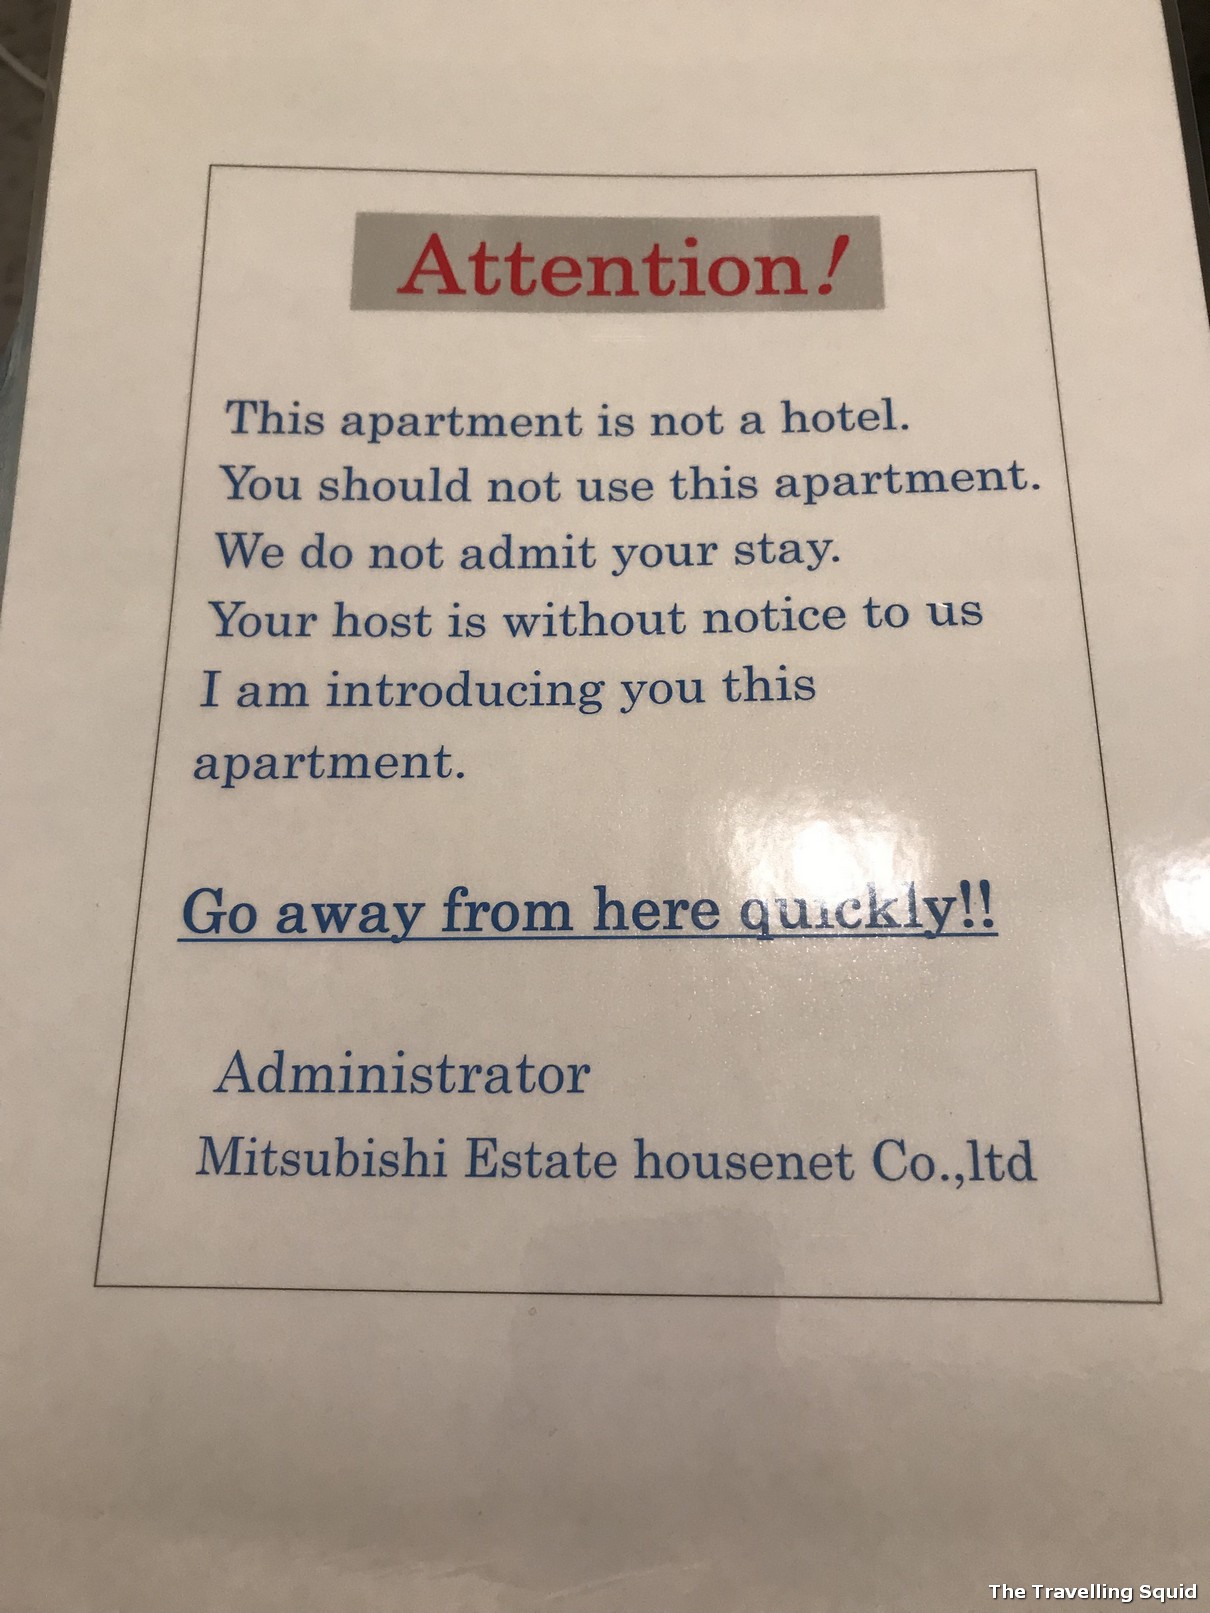 building management of our AirBnb in Tokyo tried to chase us out